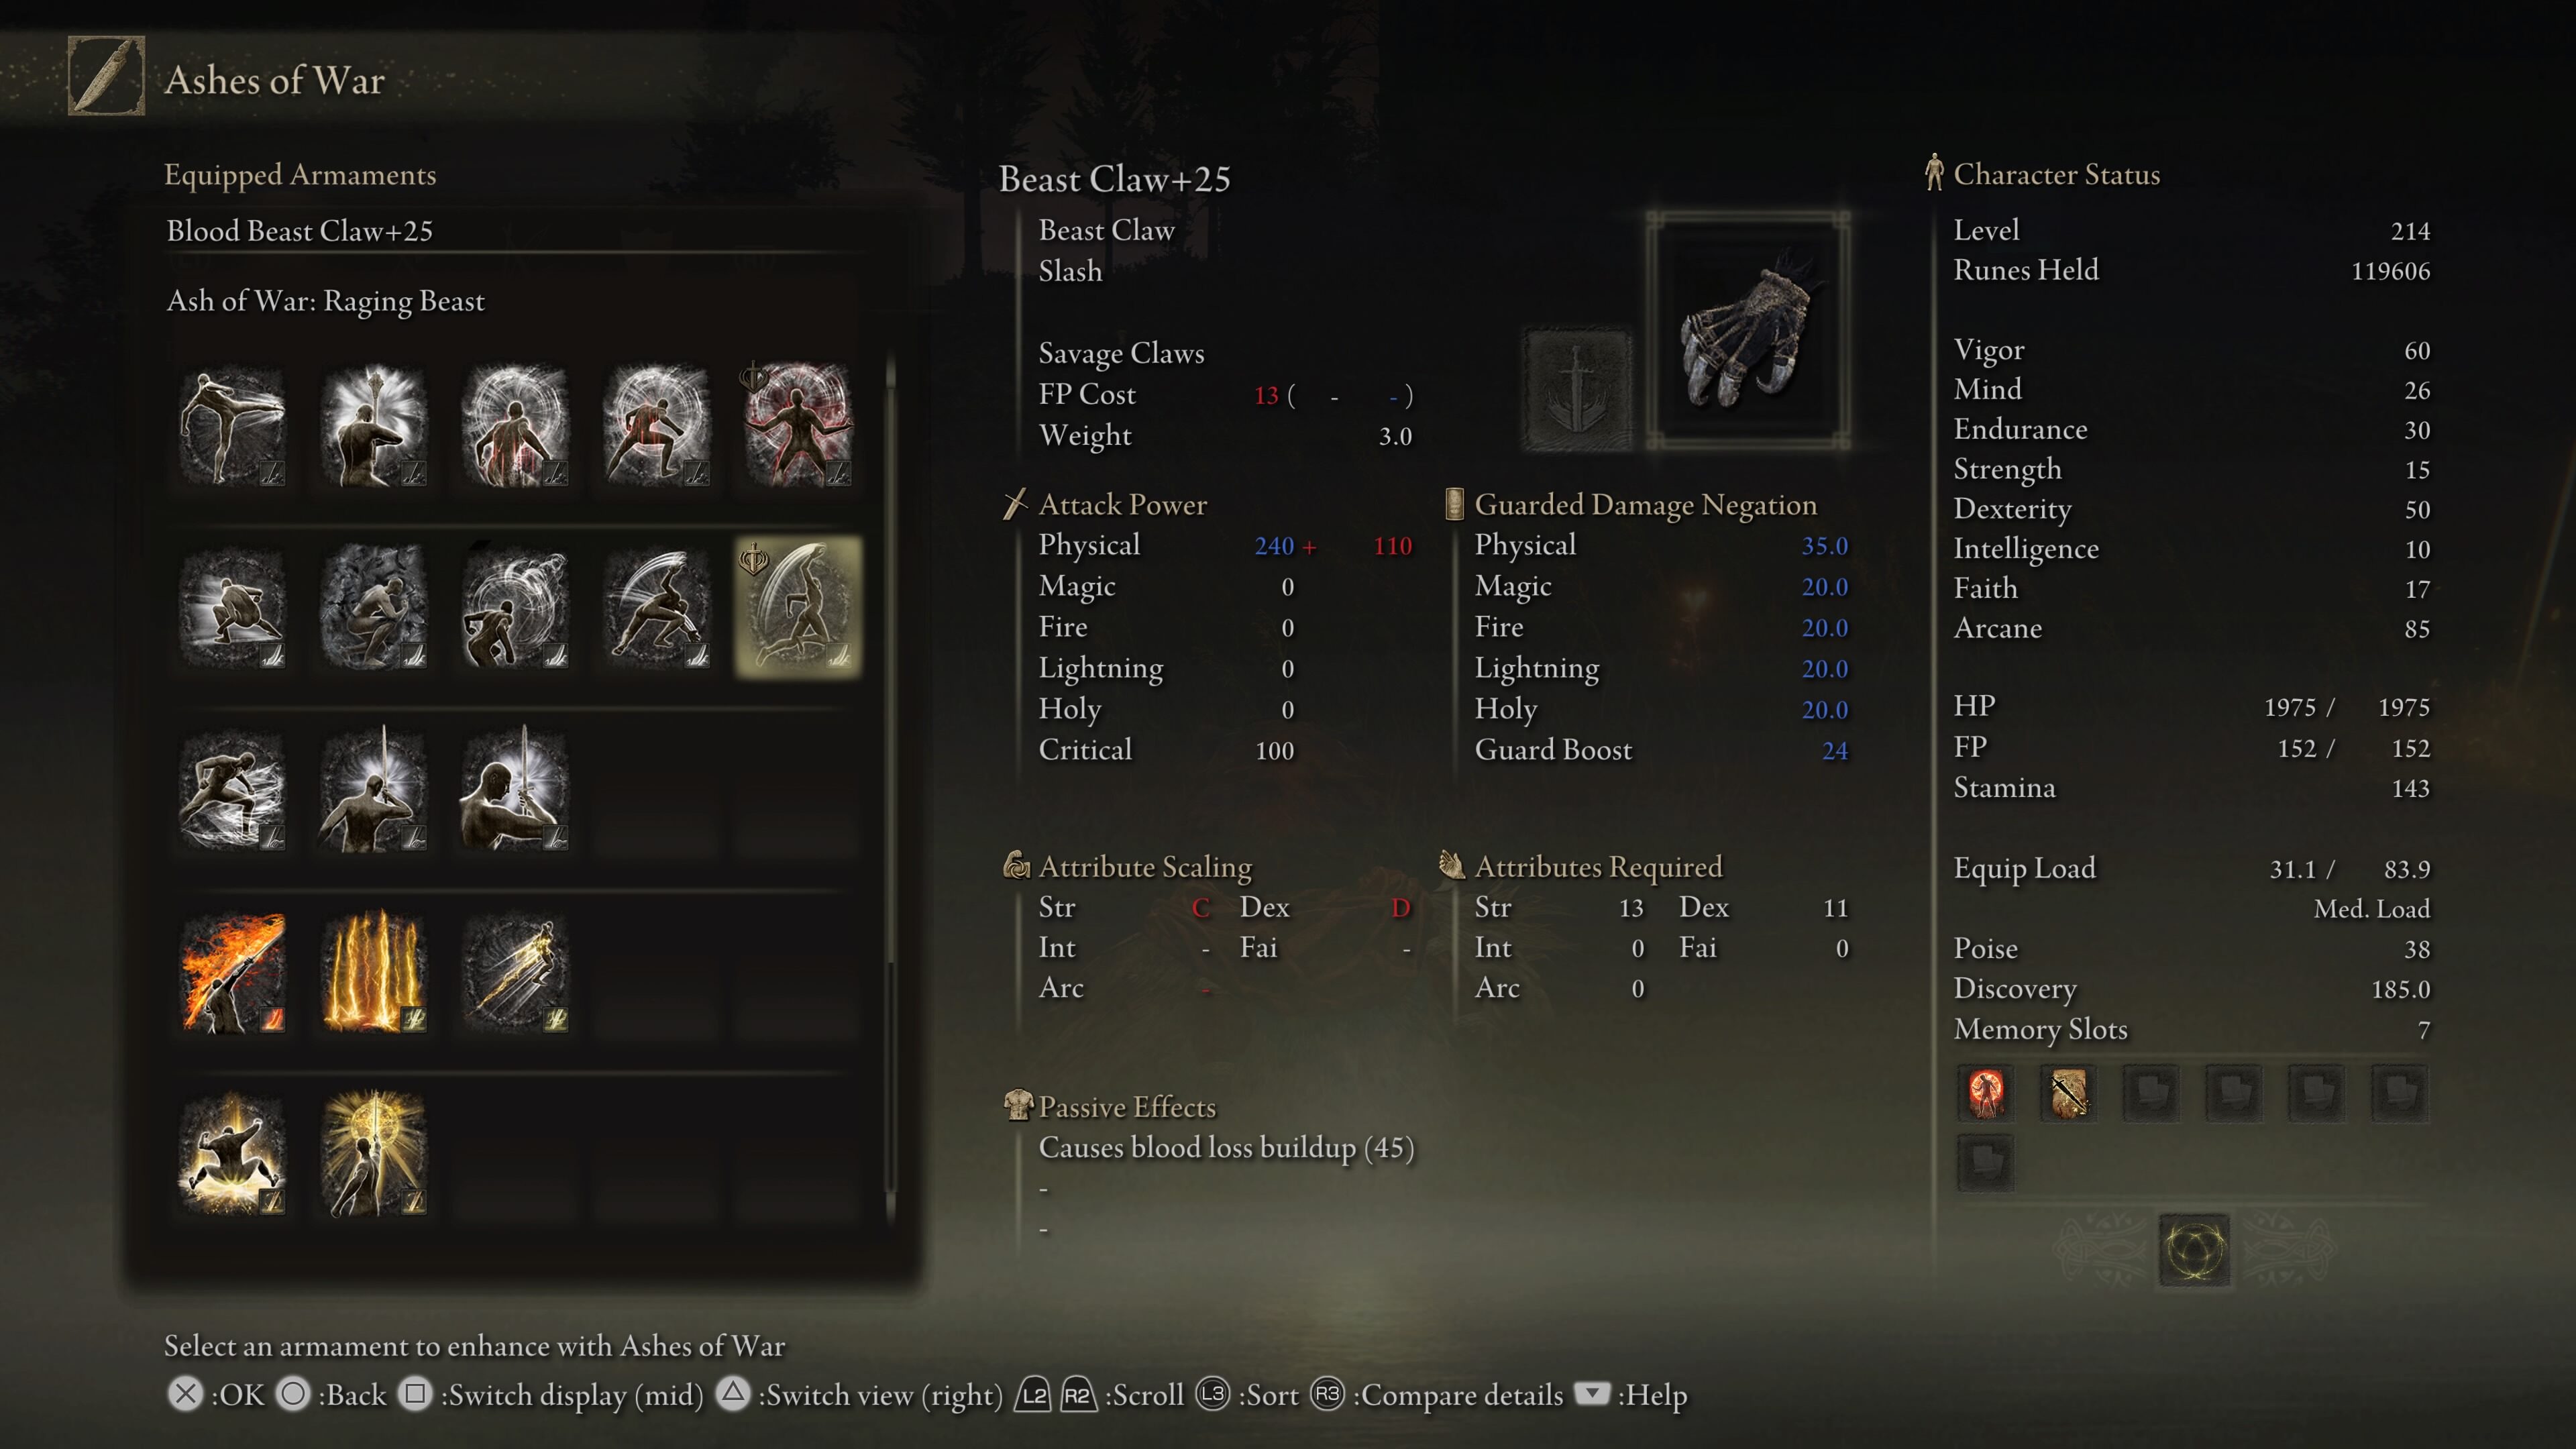 elden ring shadow of the erdtree best beast claw build - the ash of war menu showing savage claws